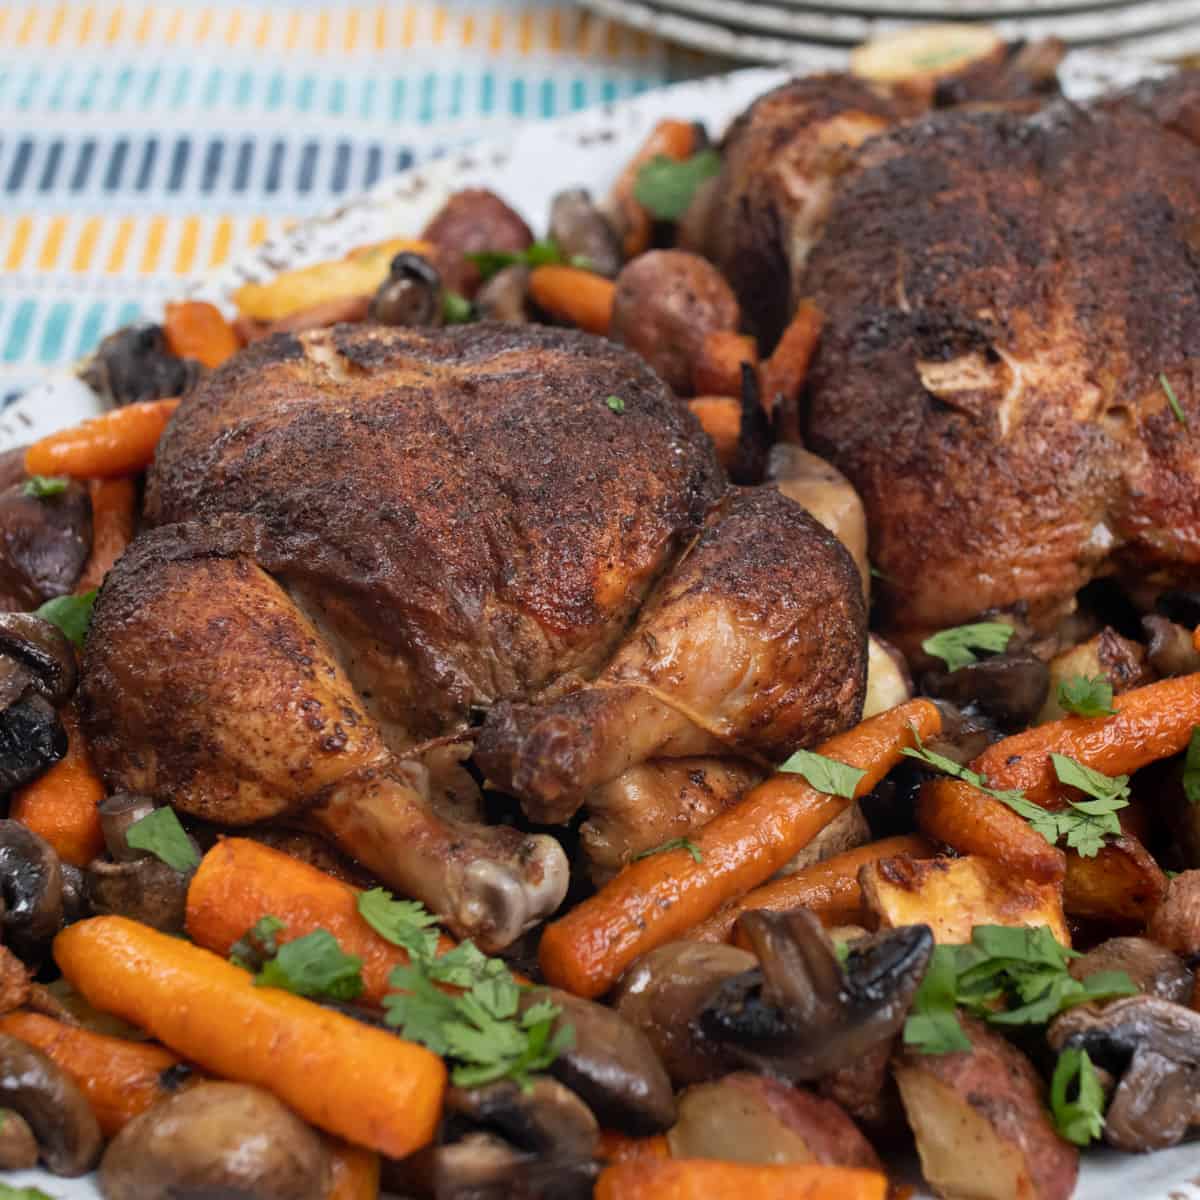 Close up picture of cooked chickens and vegetables on a platter.